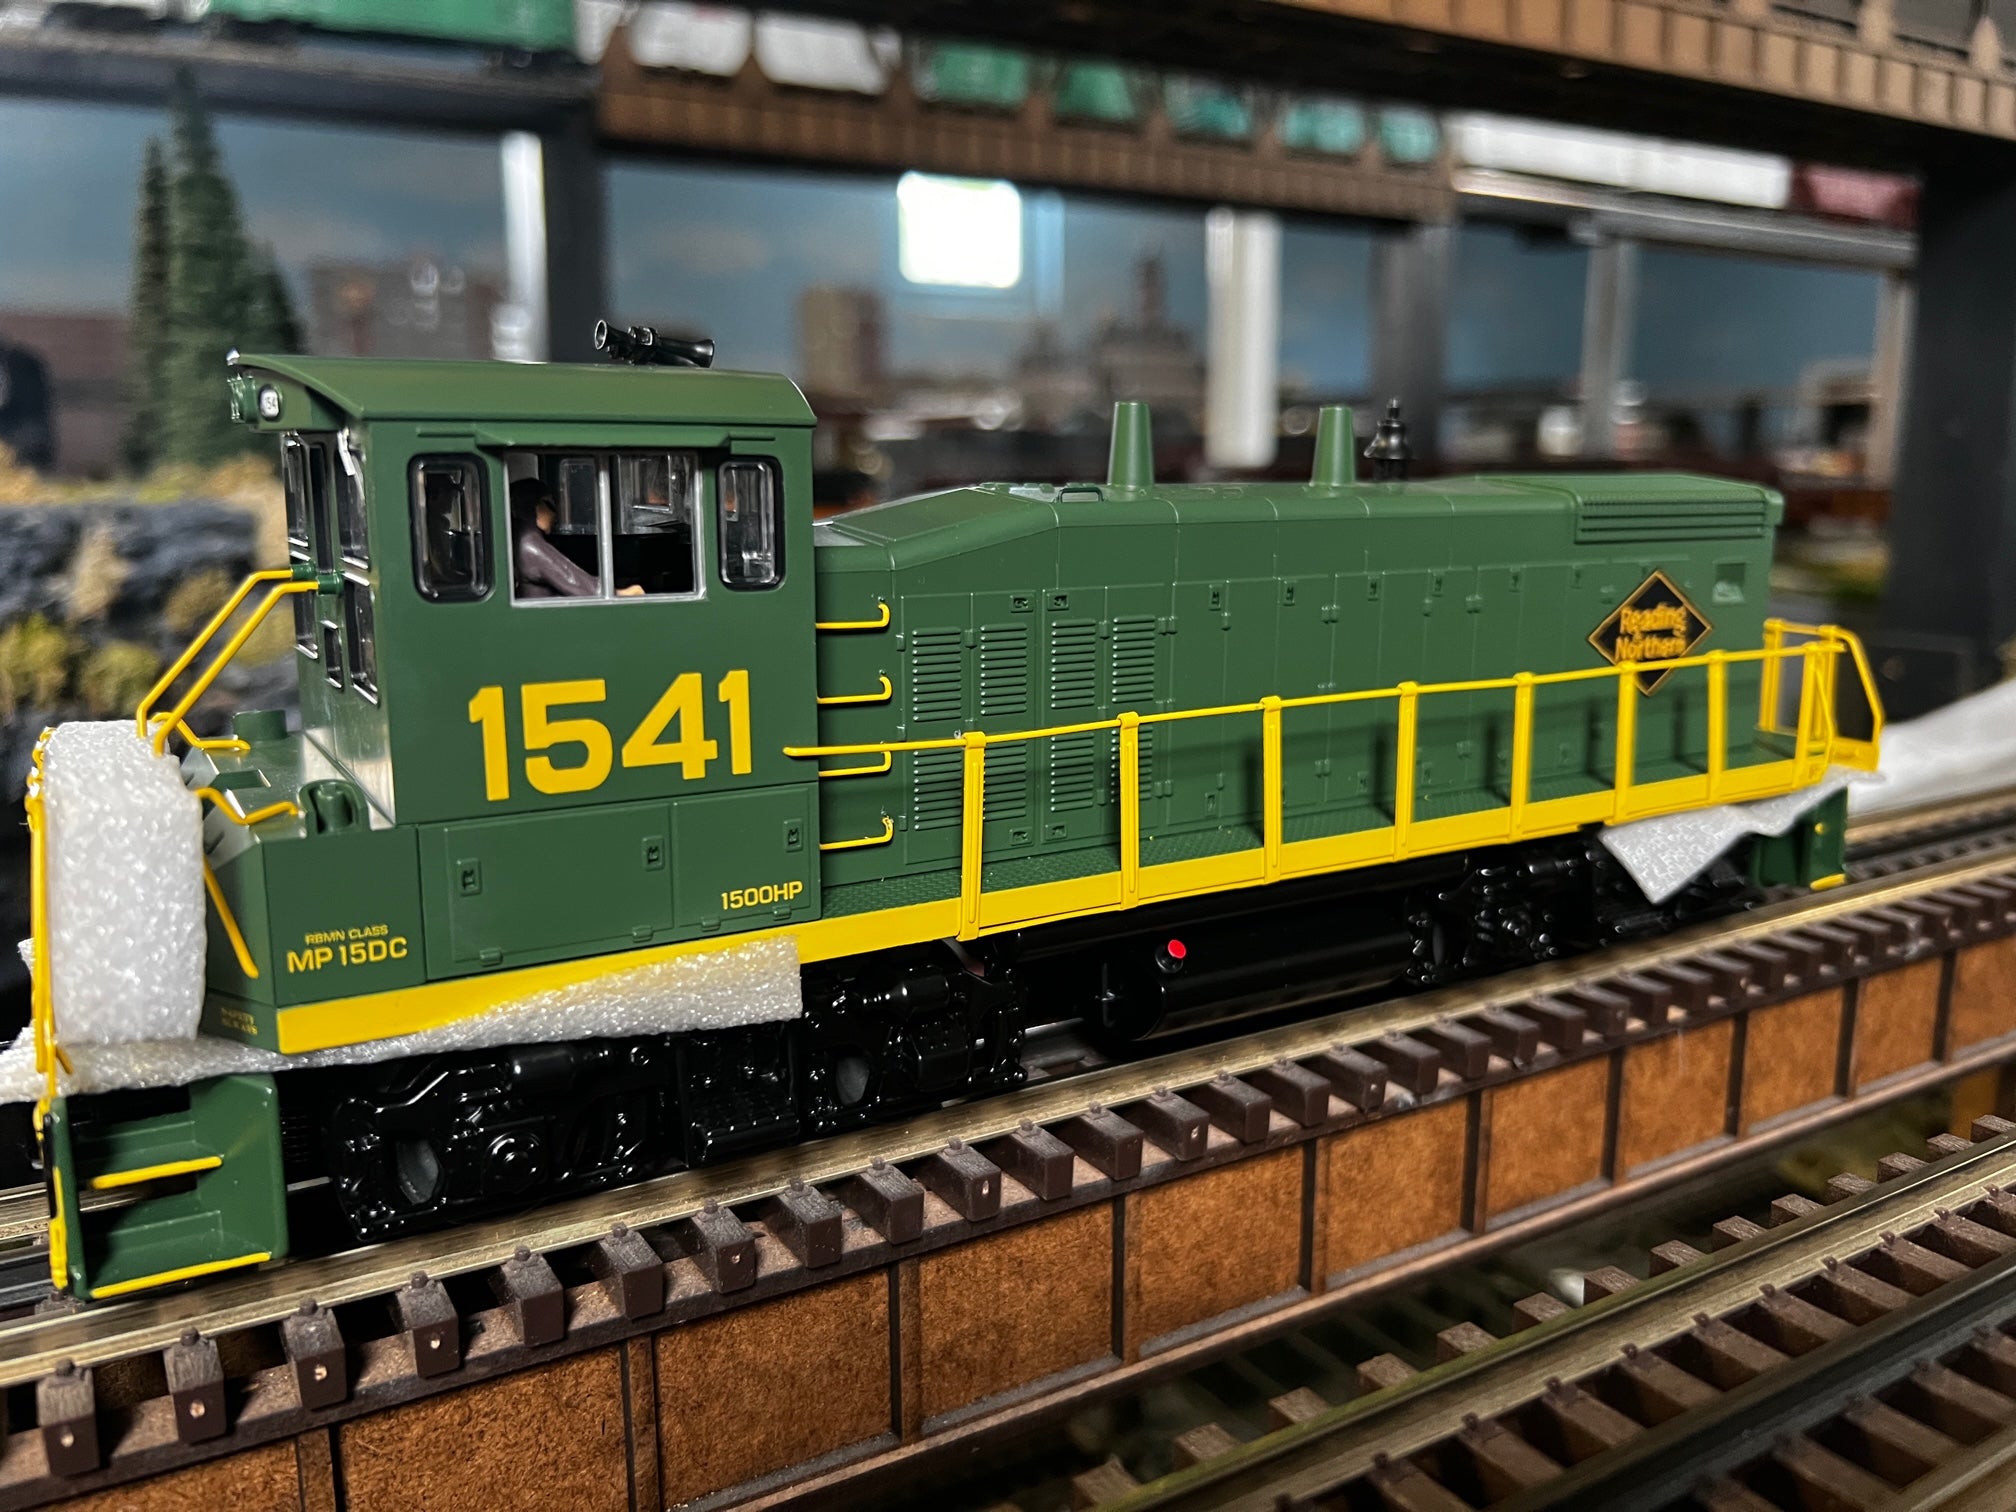 MTH 30-21006-1 - MP15 Diesel Engine "Reading & Northern" #1541 w/ PS3 - Custom Run for Fryer’s Store